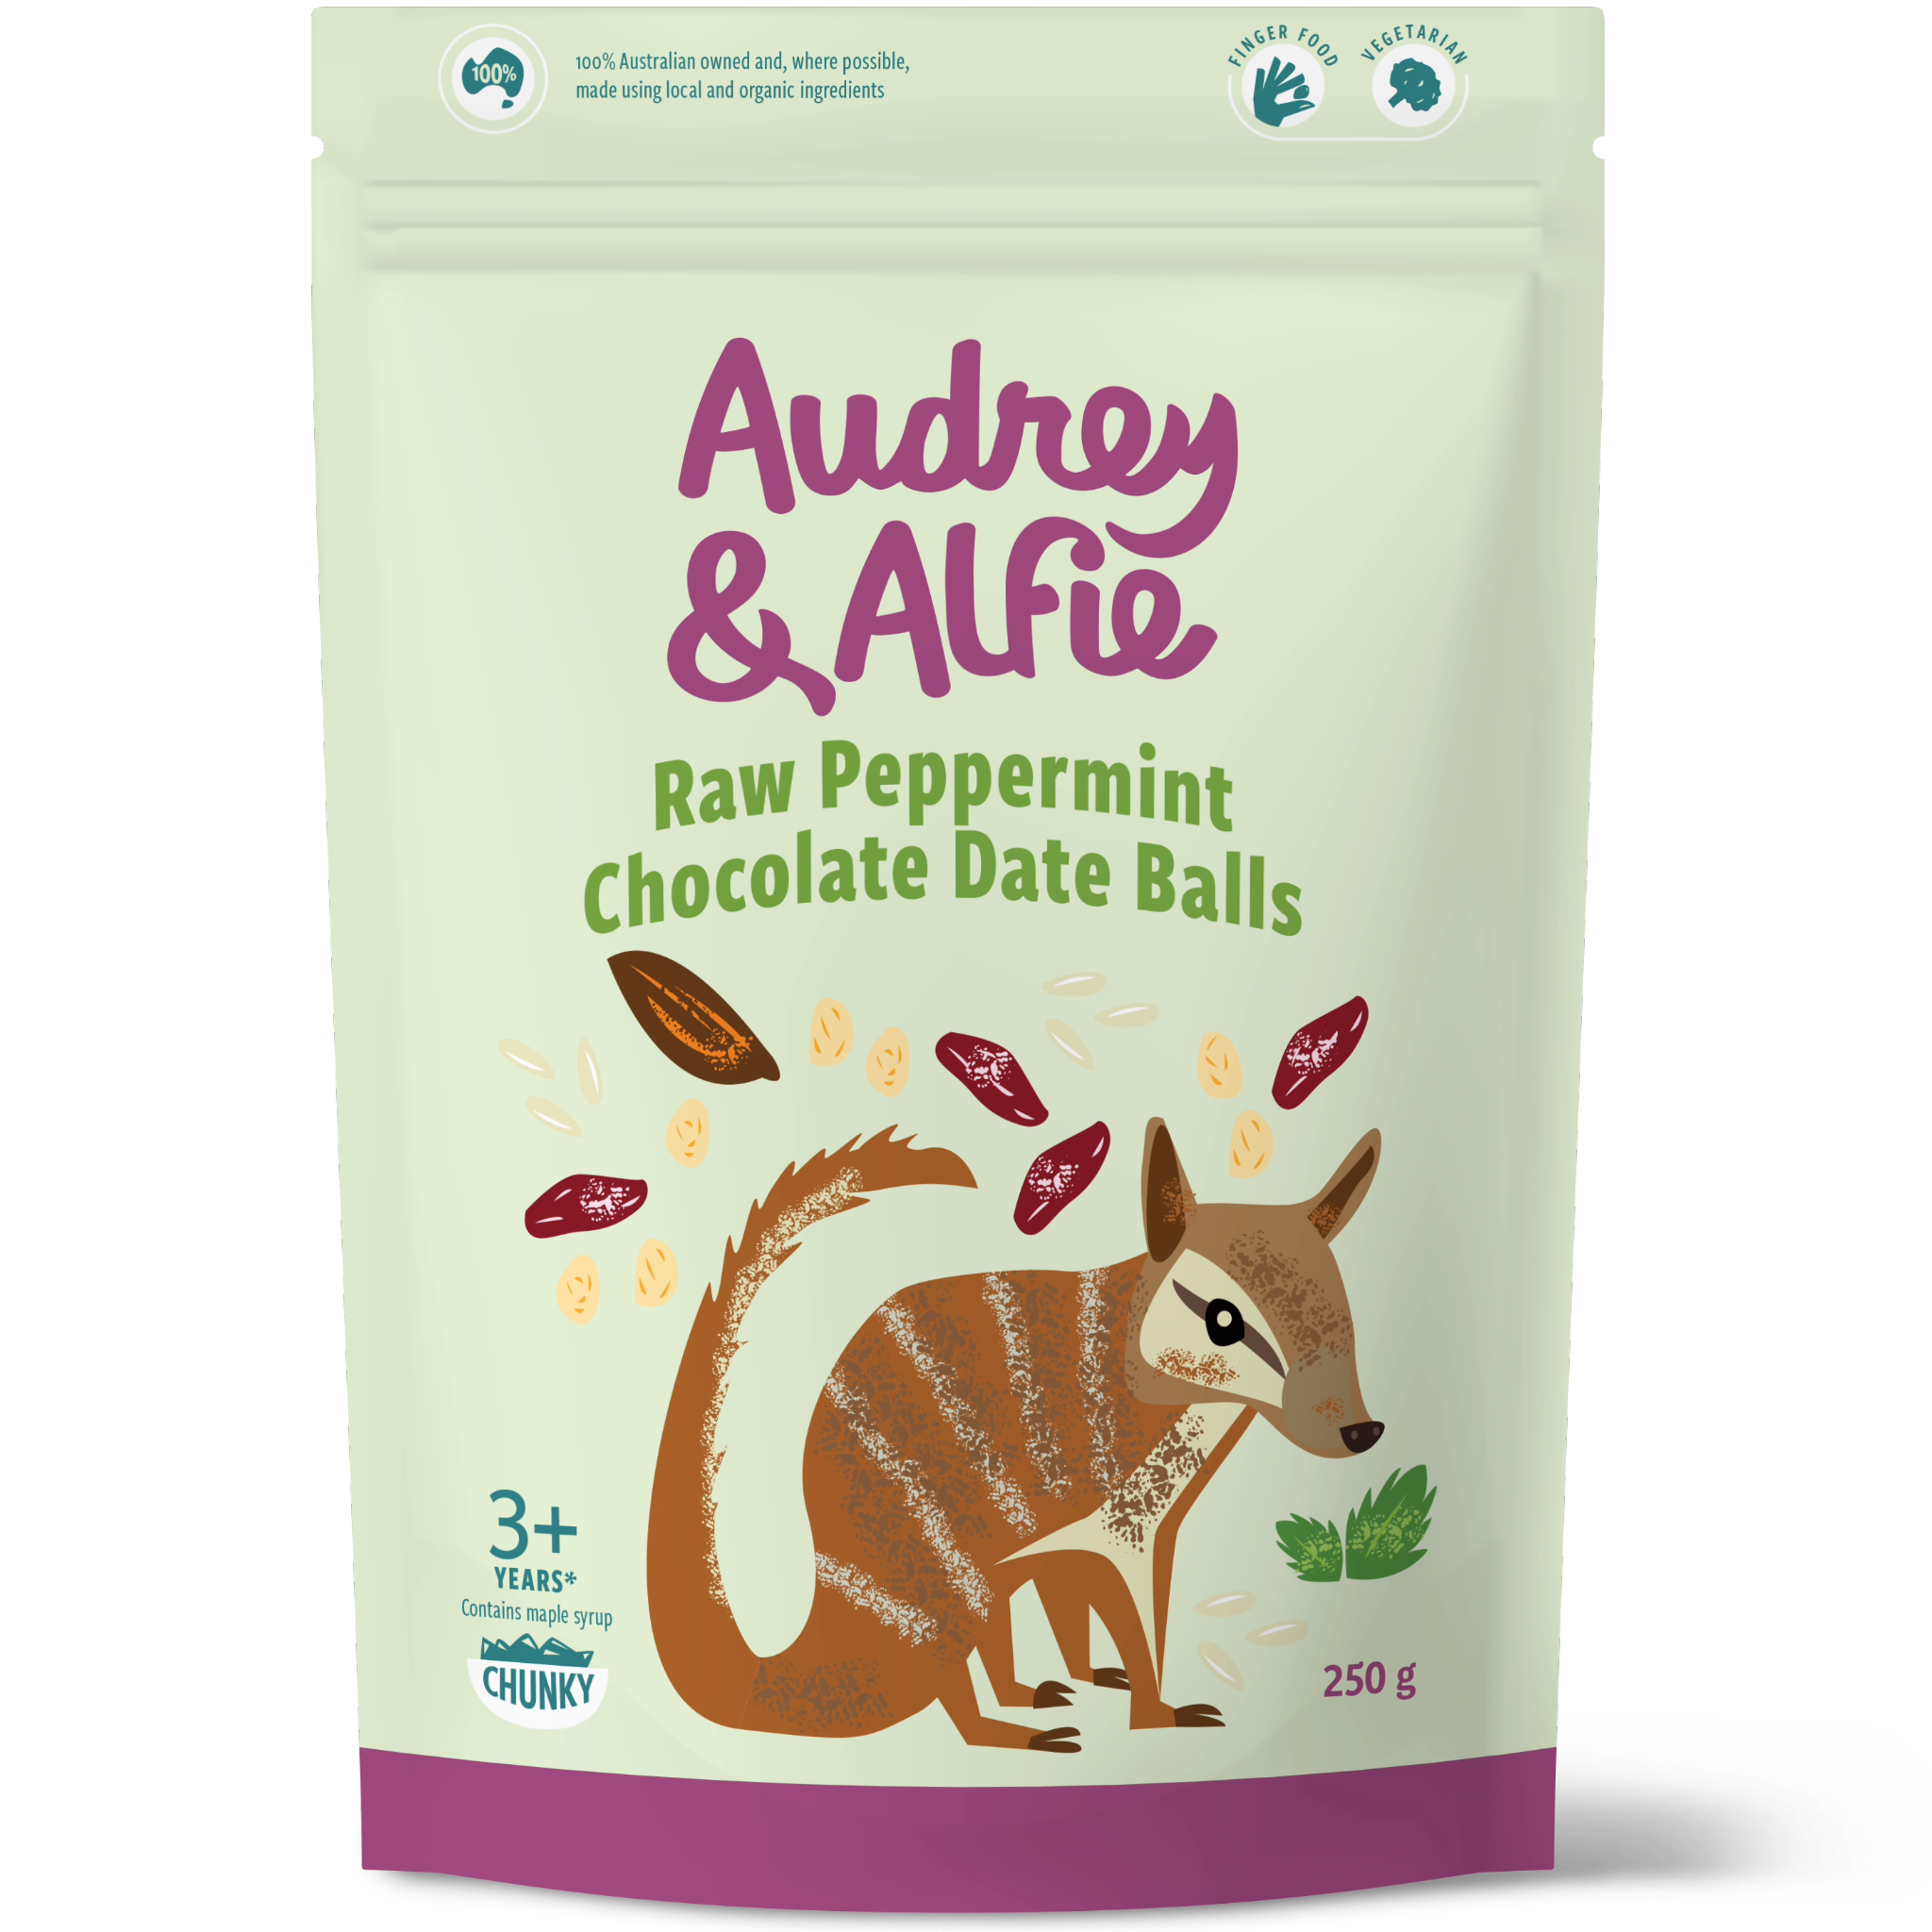 A Packet of Raw Peppermint Chocolate Date Balls from Audrey & Alfie's Finger Food Range